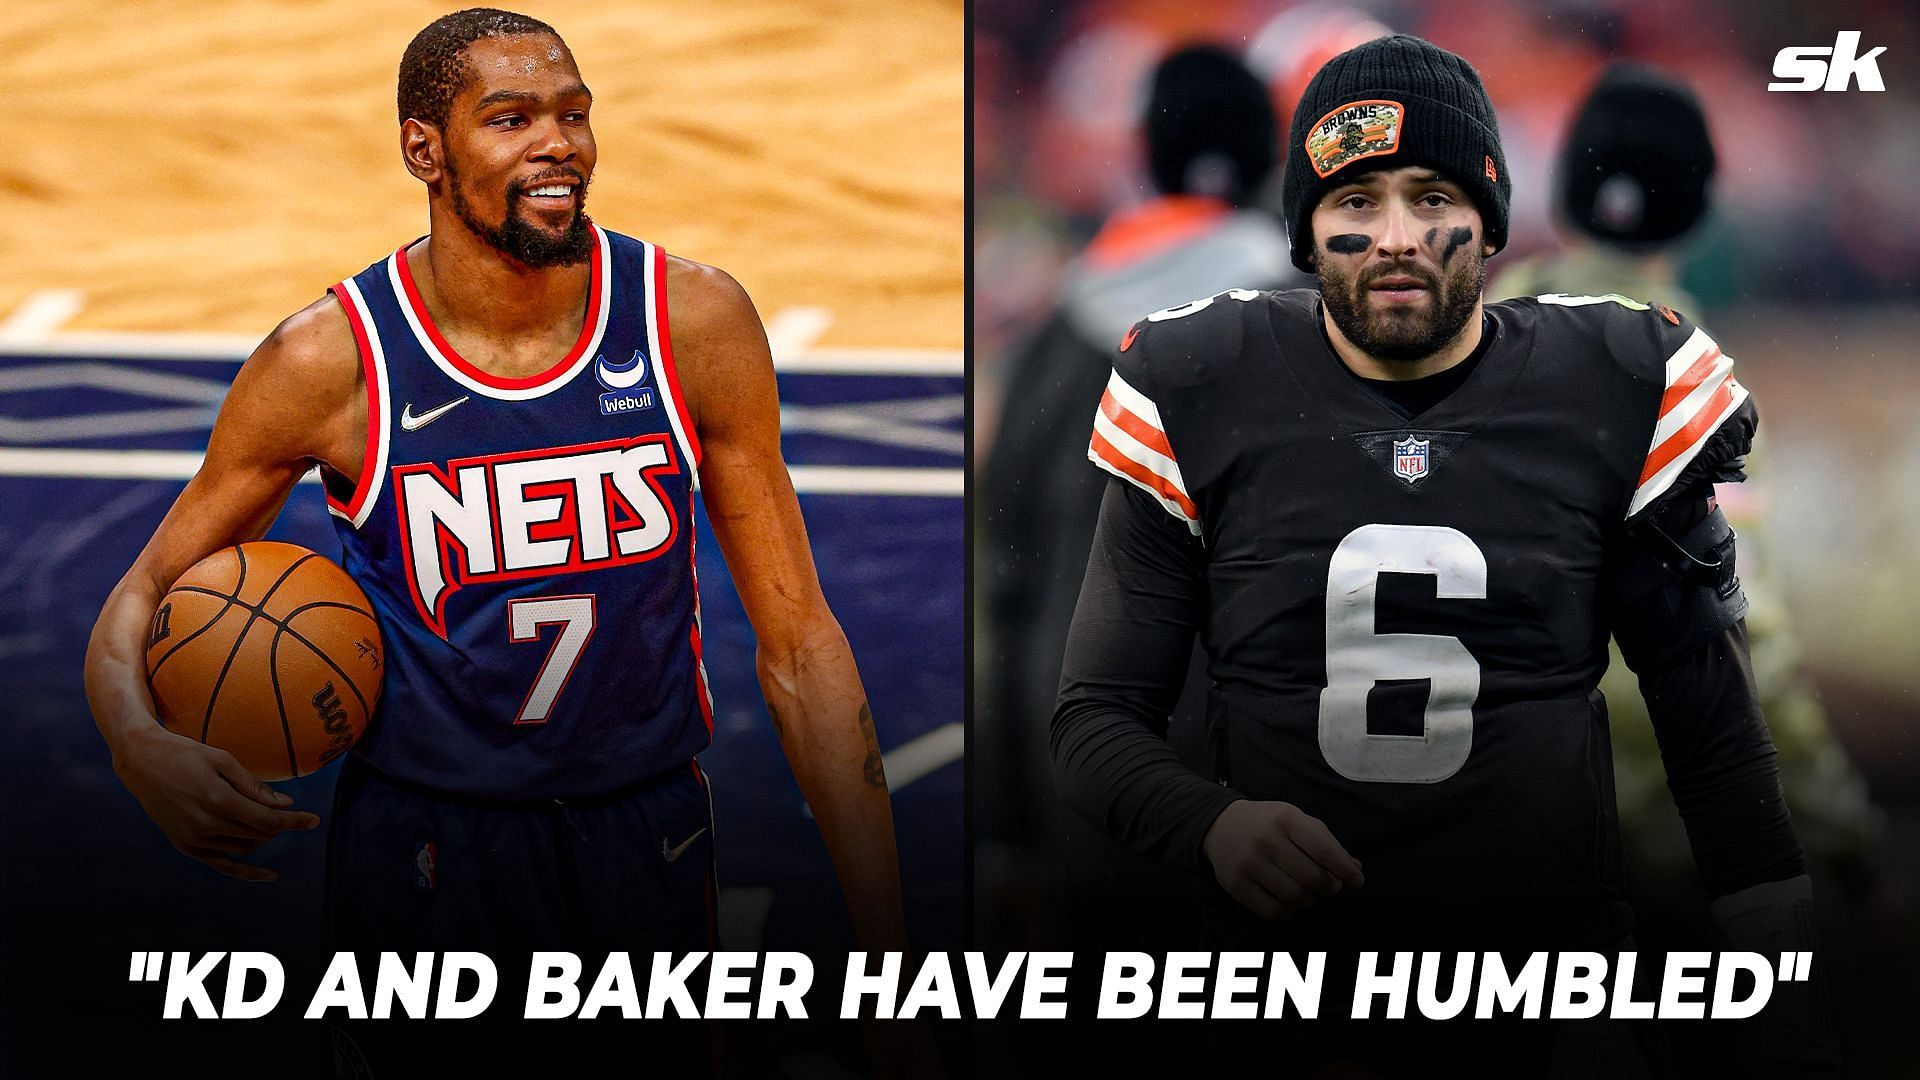 Skip Bayless criticizes Kevin Durant, Baker Mayfield